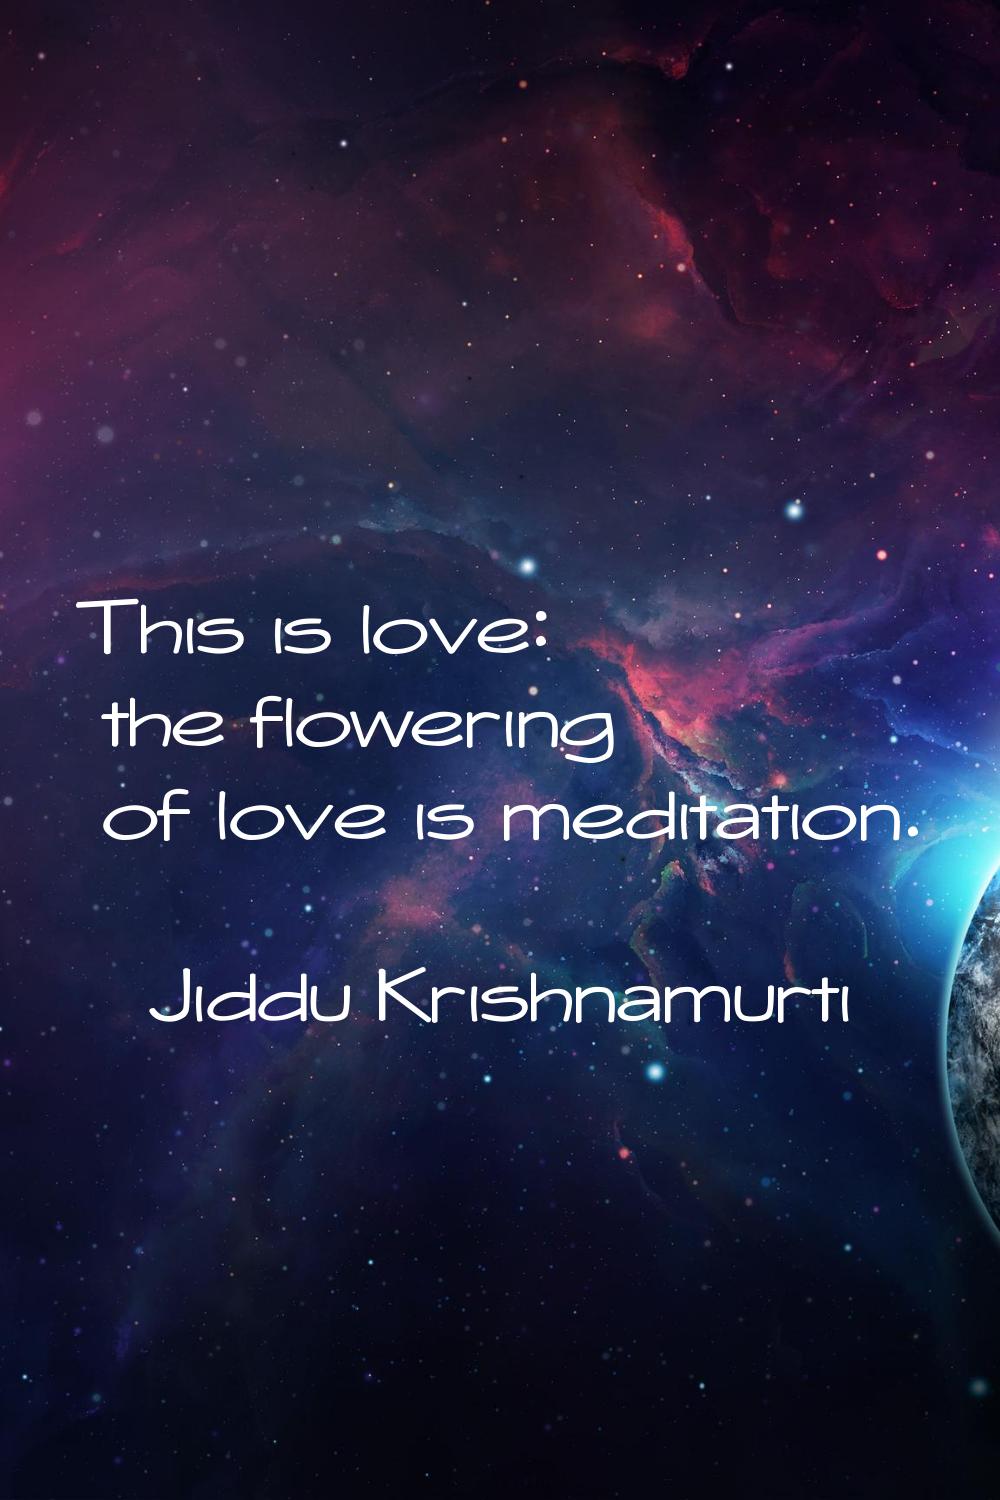 This is love: the flowering of love is meditation.